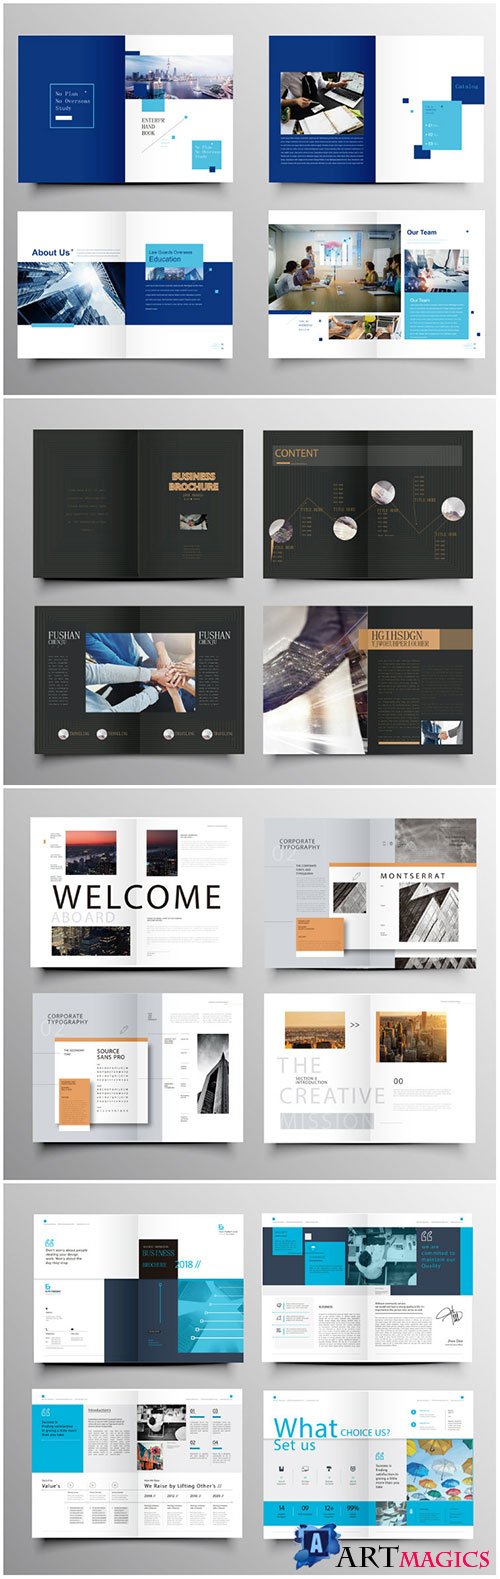 Brochure template vector layout design, corporate business annual report, magazine, flyer mockup # 235